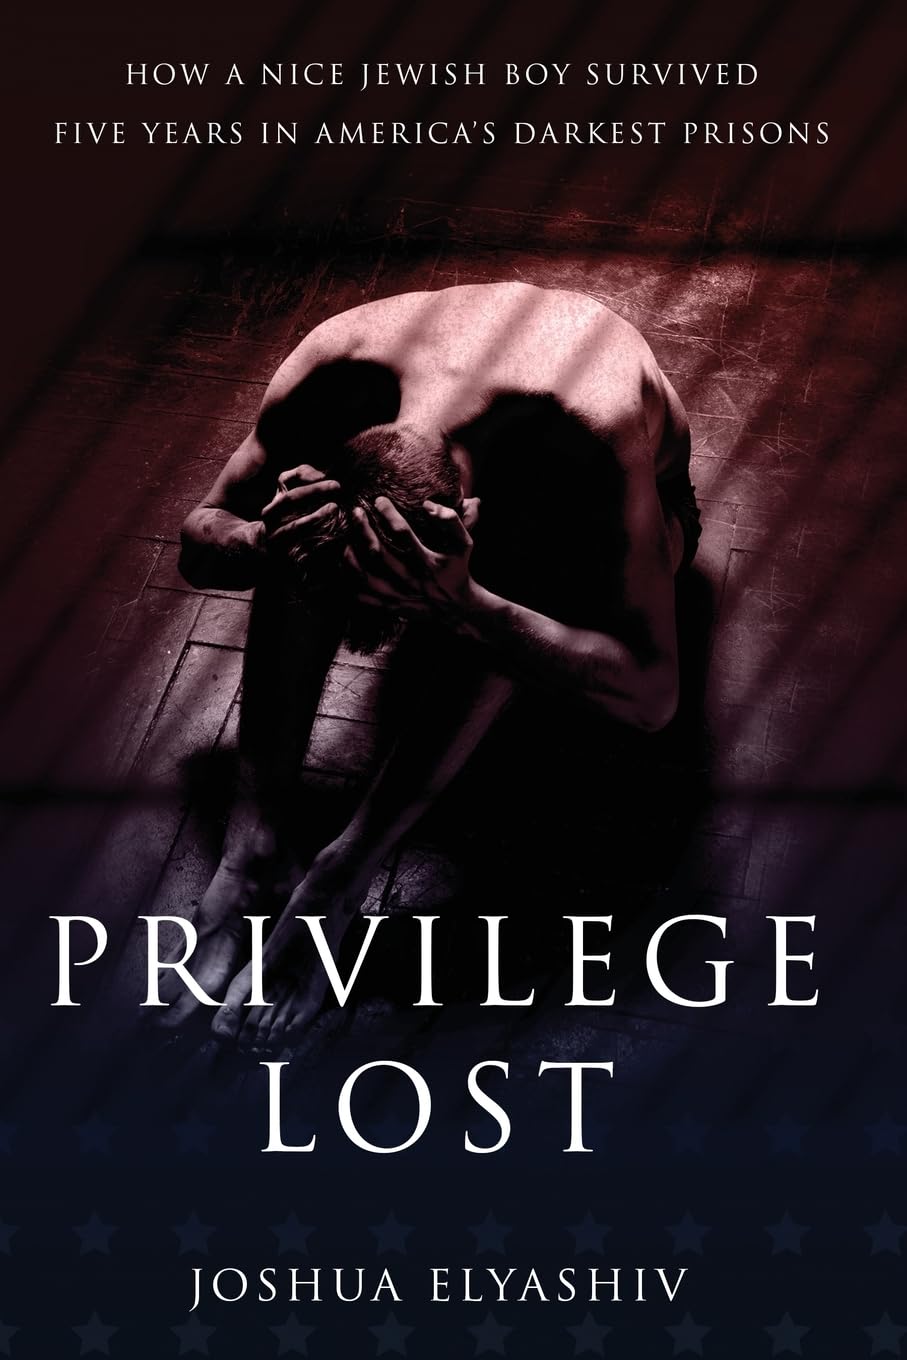 New memoir "Privilege Lost" by Joshua Elyashiv is released, the brutal true story of a suburban young man’s journey through violence, prison, and adversity on a path to peace and redemption